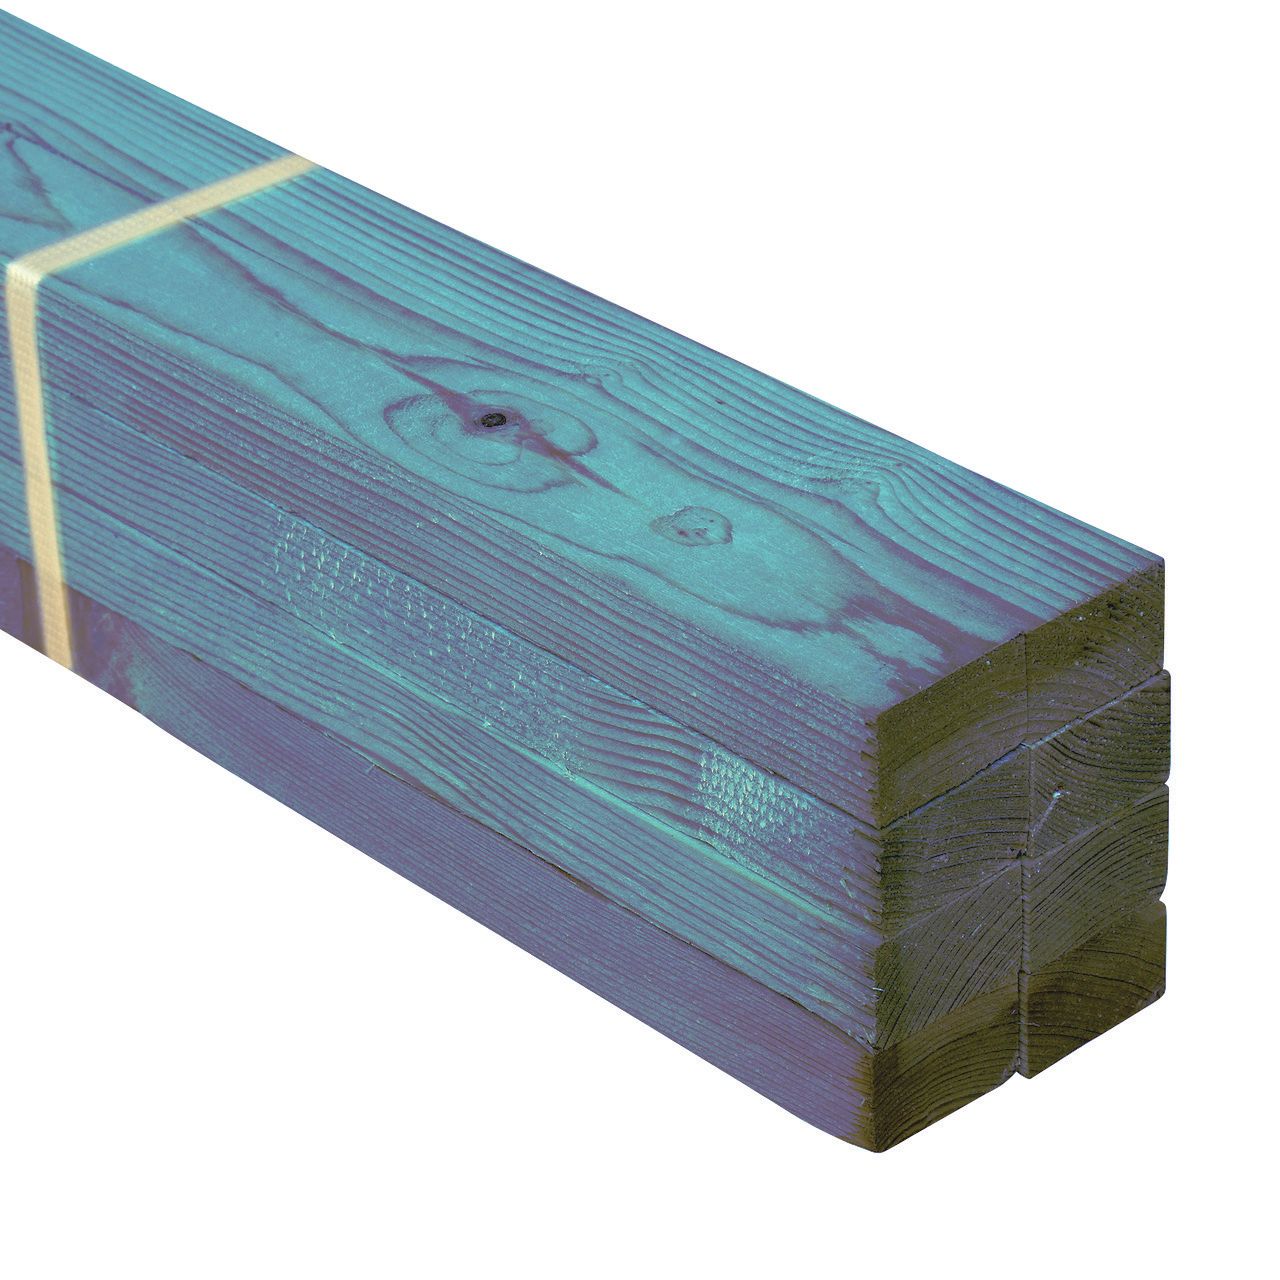 Image of Wickes Treated Timber Roof Batten - 25 x 50 x 4800mm - Pack of 8